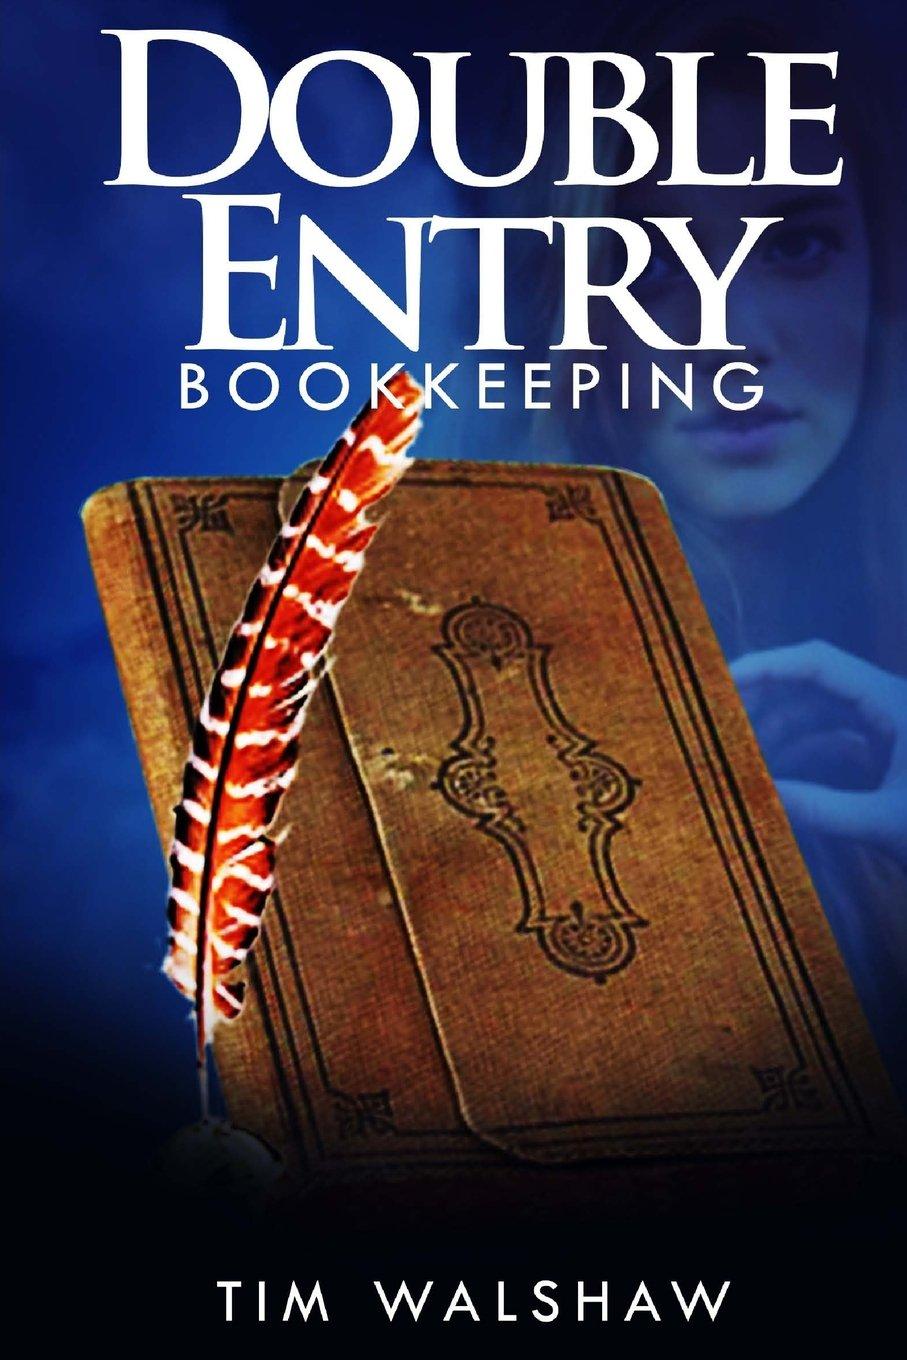 double entry bookkeeping 1st edition mr timothy john walshaw 0987611321, 978-0987611321